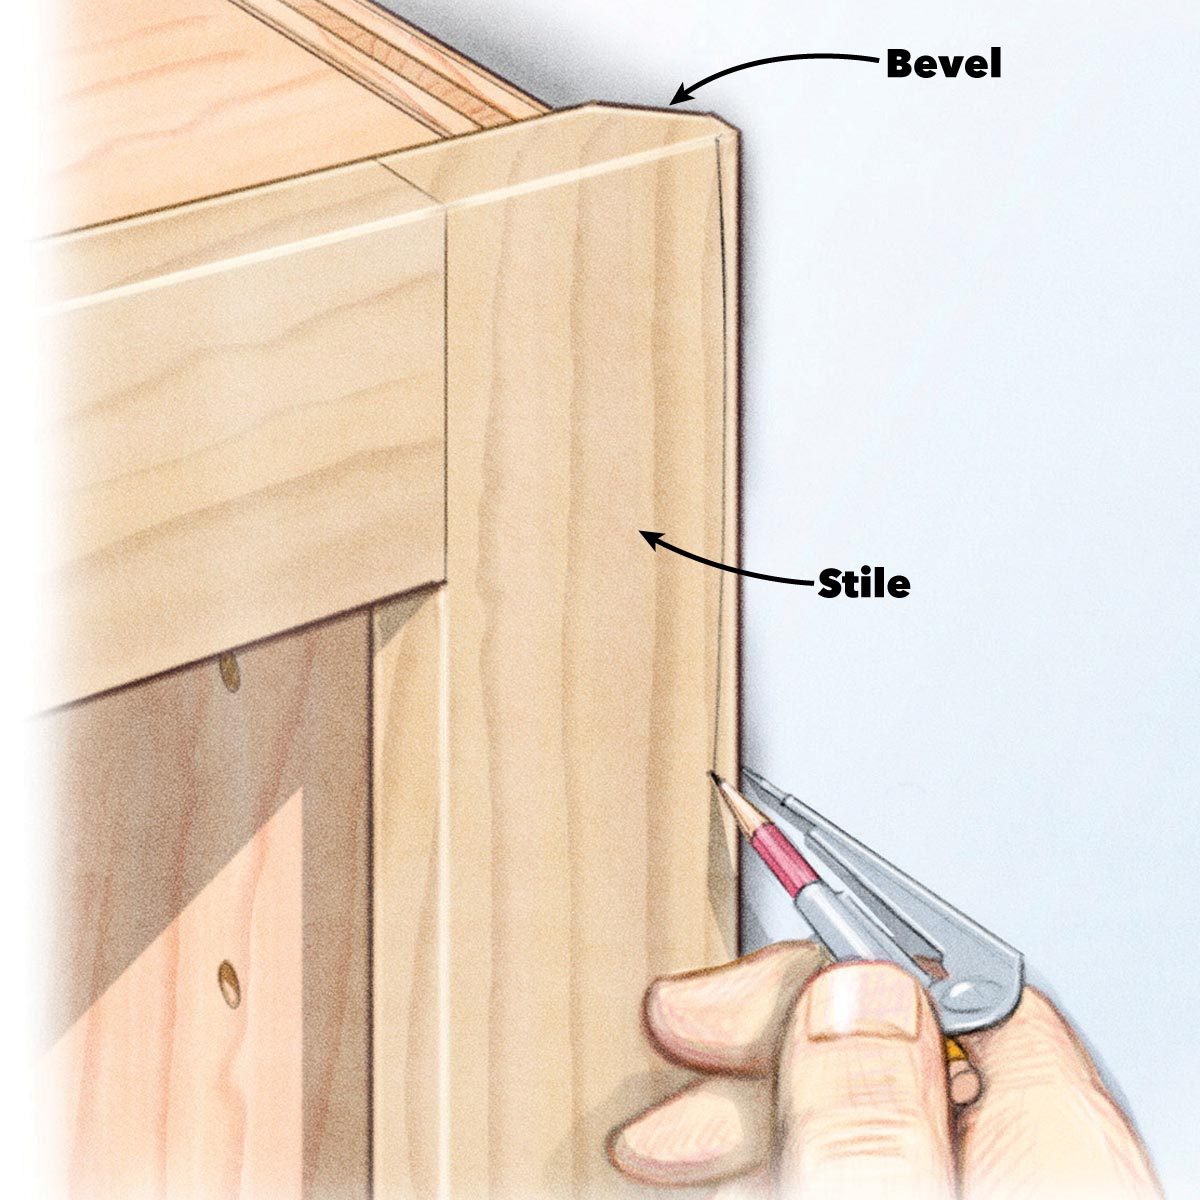 Shortcuts For Custom Built Cabinets And Diy Built Ins Family